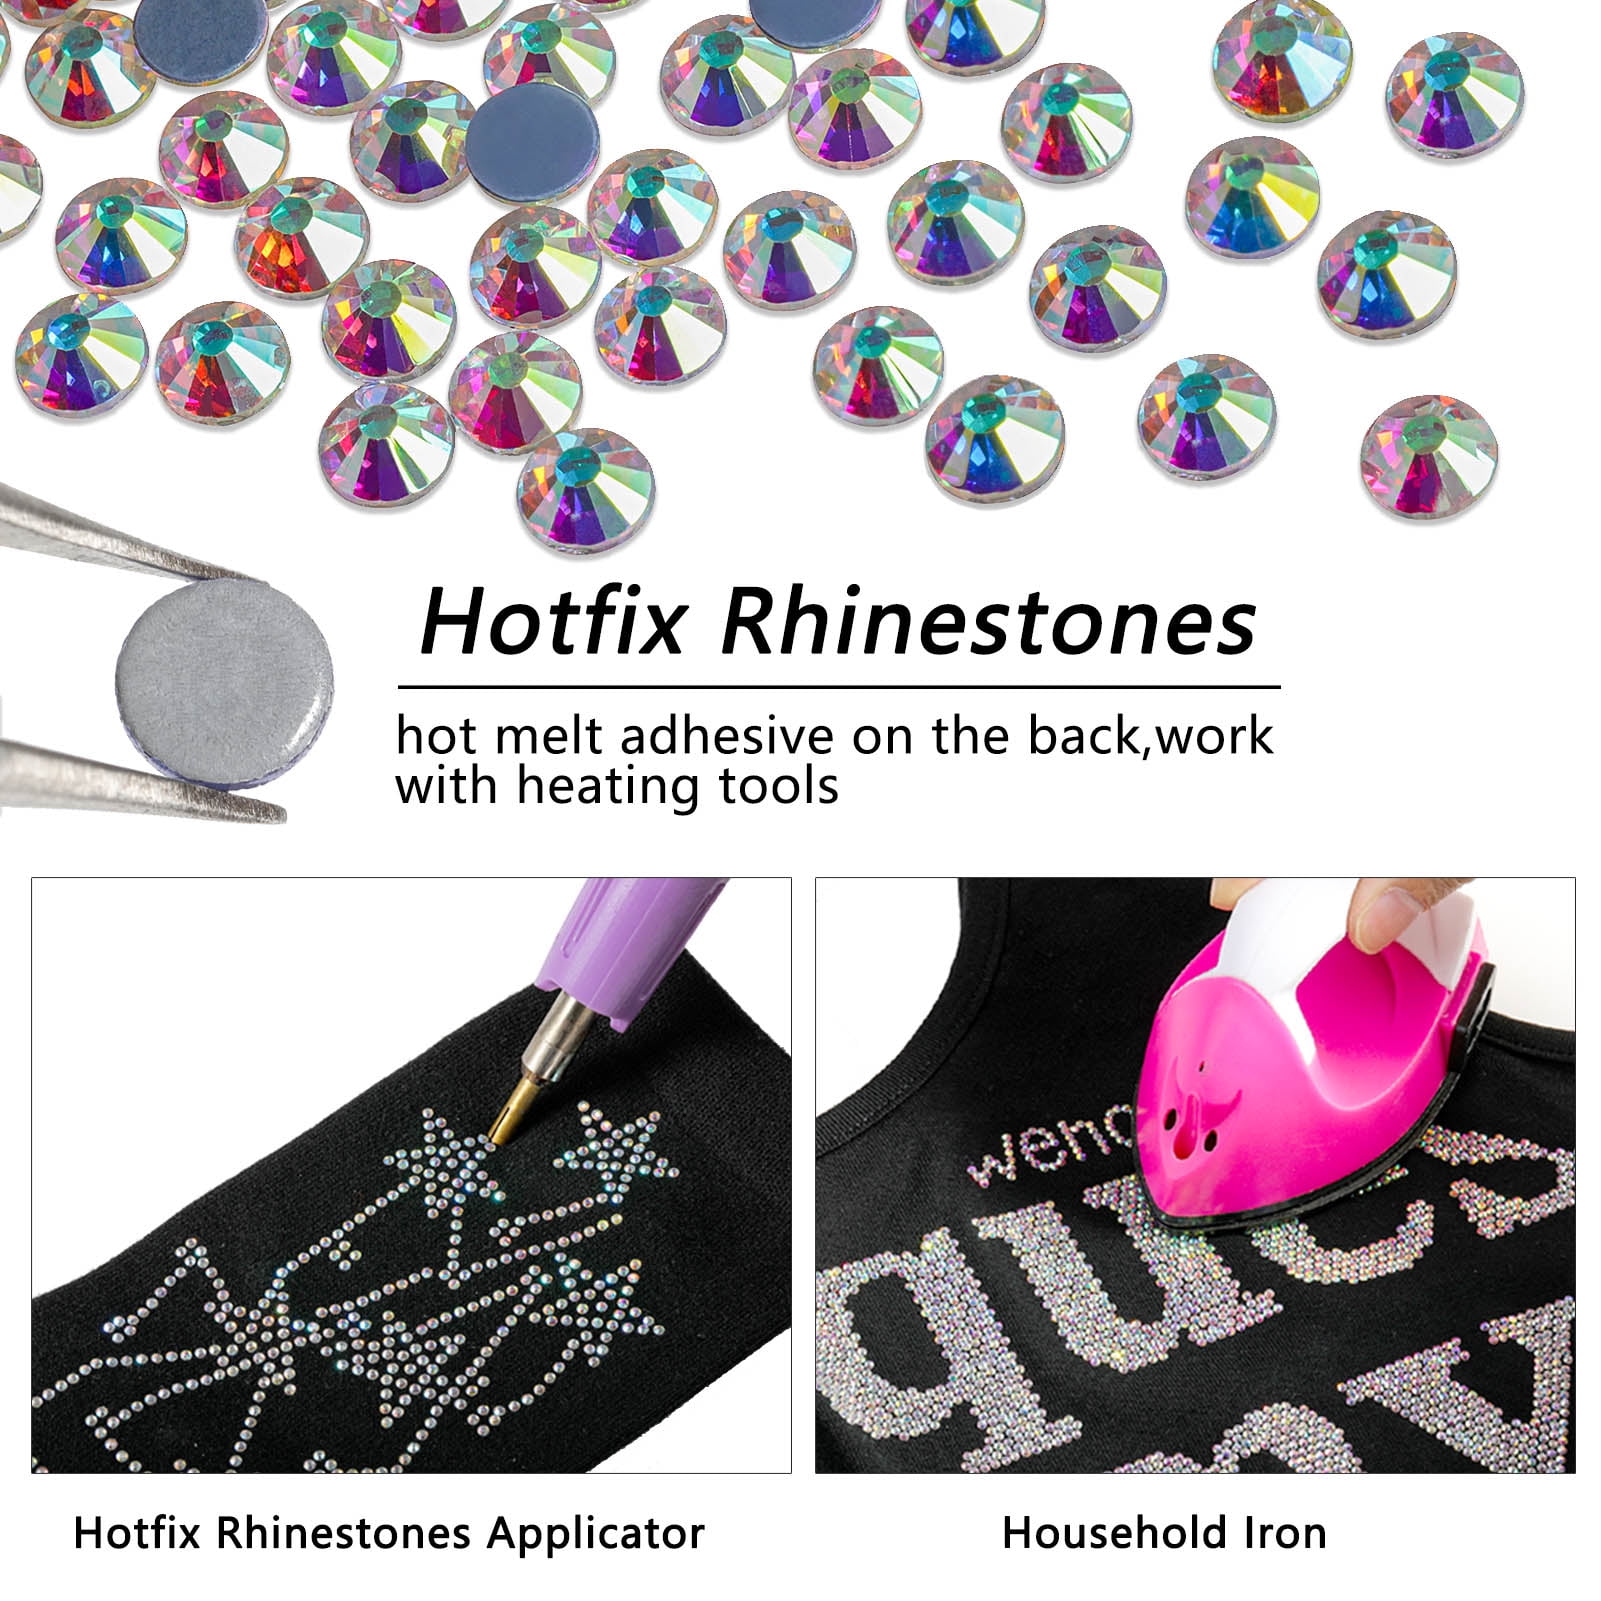 Worthofbest Bedazzler Kit with Rhinestones, Hotfix Rhinestone Applicator, Age: 12 and Above, Size: SS20 Ss16 SS10